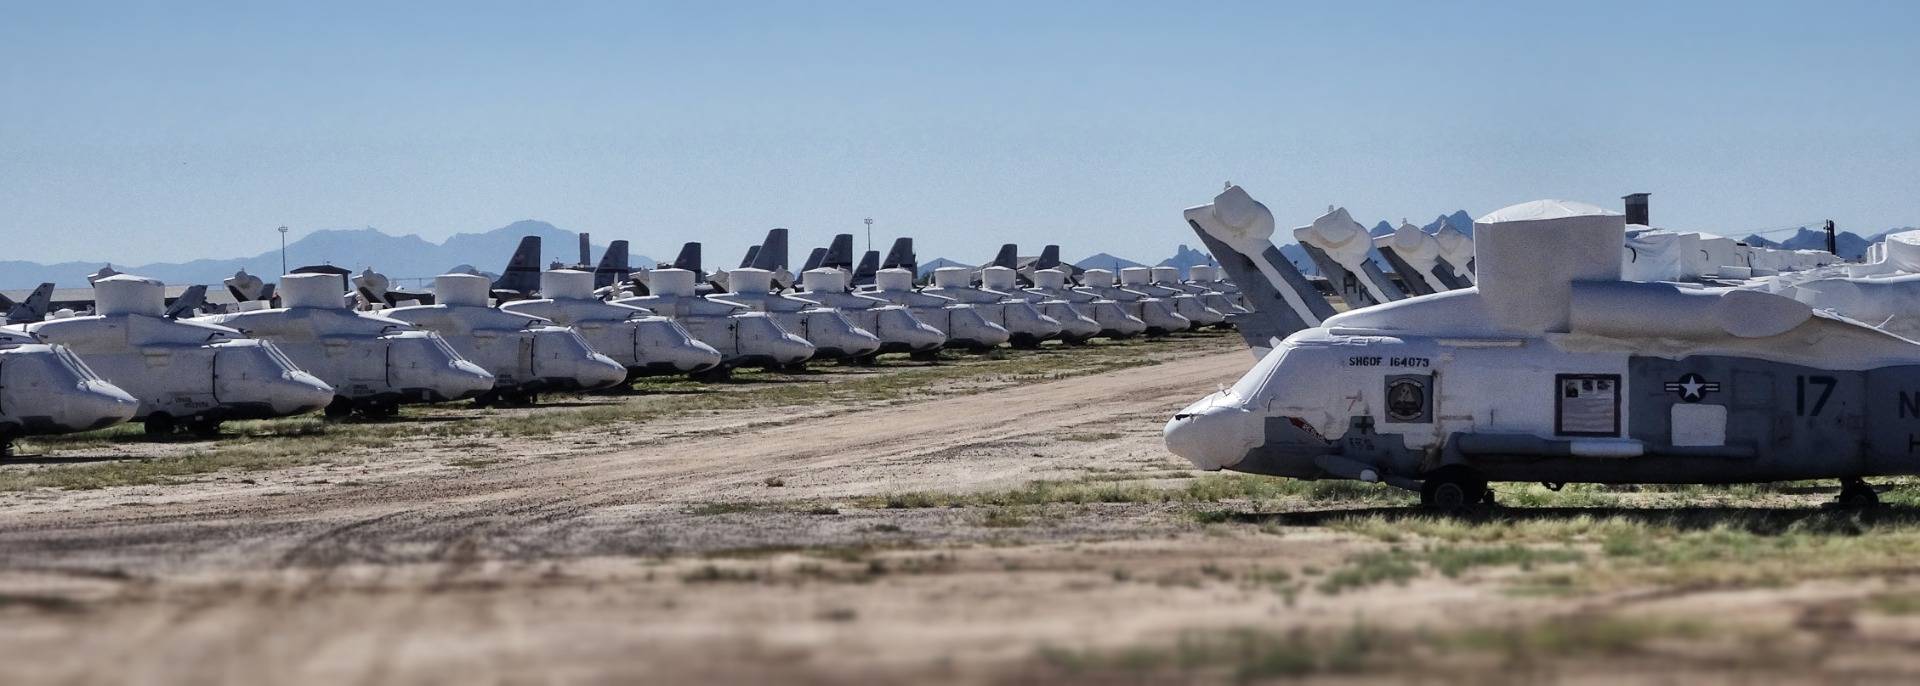 Pima Air & Space: Graveyard of the flying giants